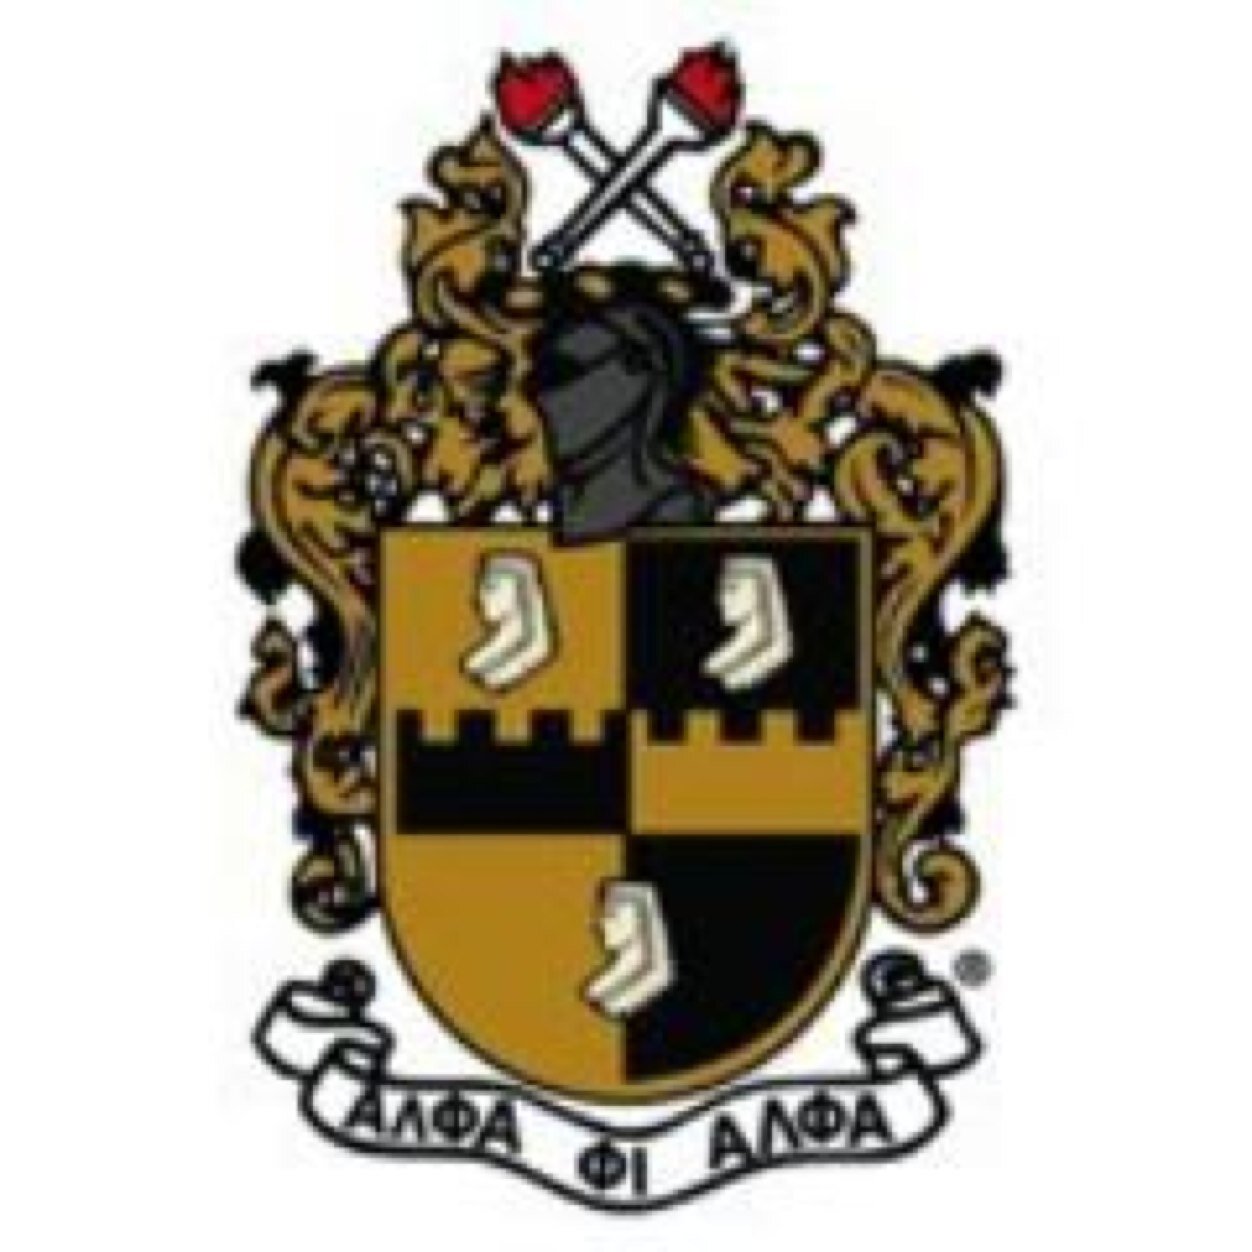 Epsilon Chi Lambda Chapter of Alpha Phi Alpha Fraternity, Inc. was founded on December 7, 1953 in Hertford, NC.